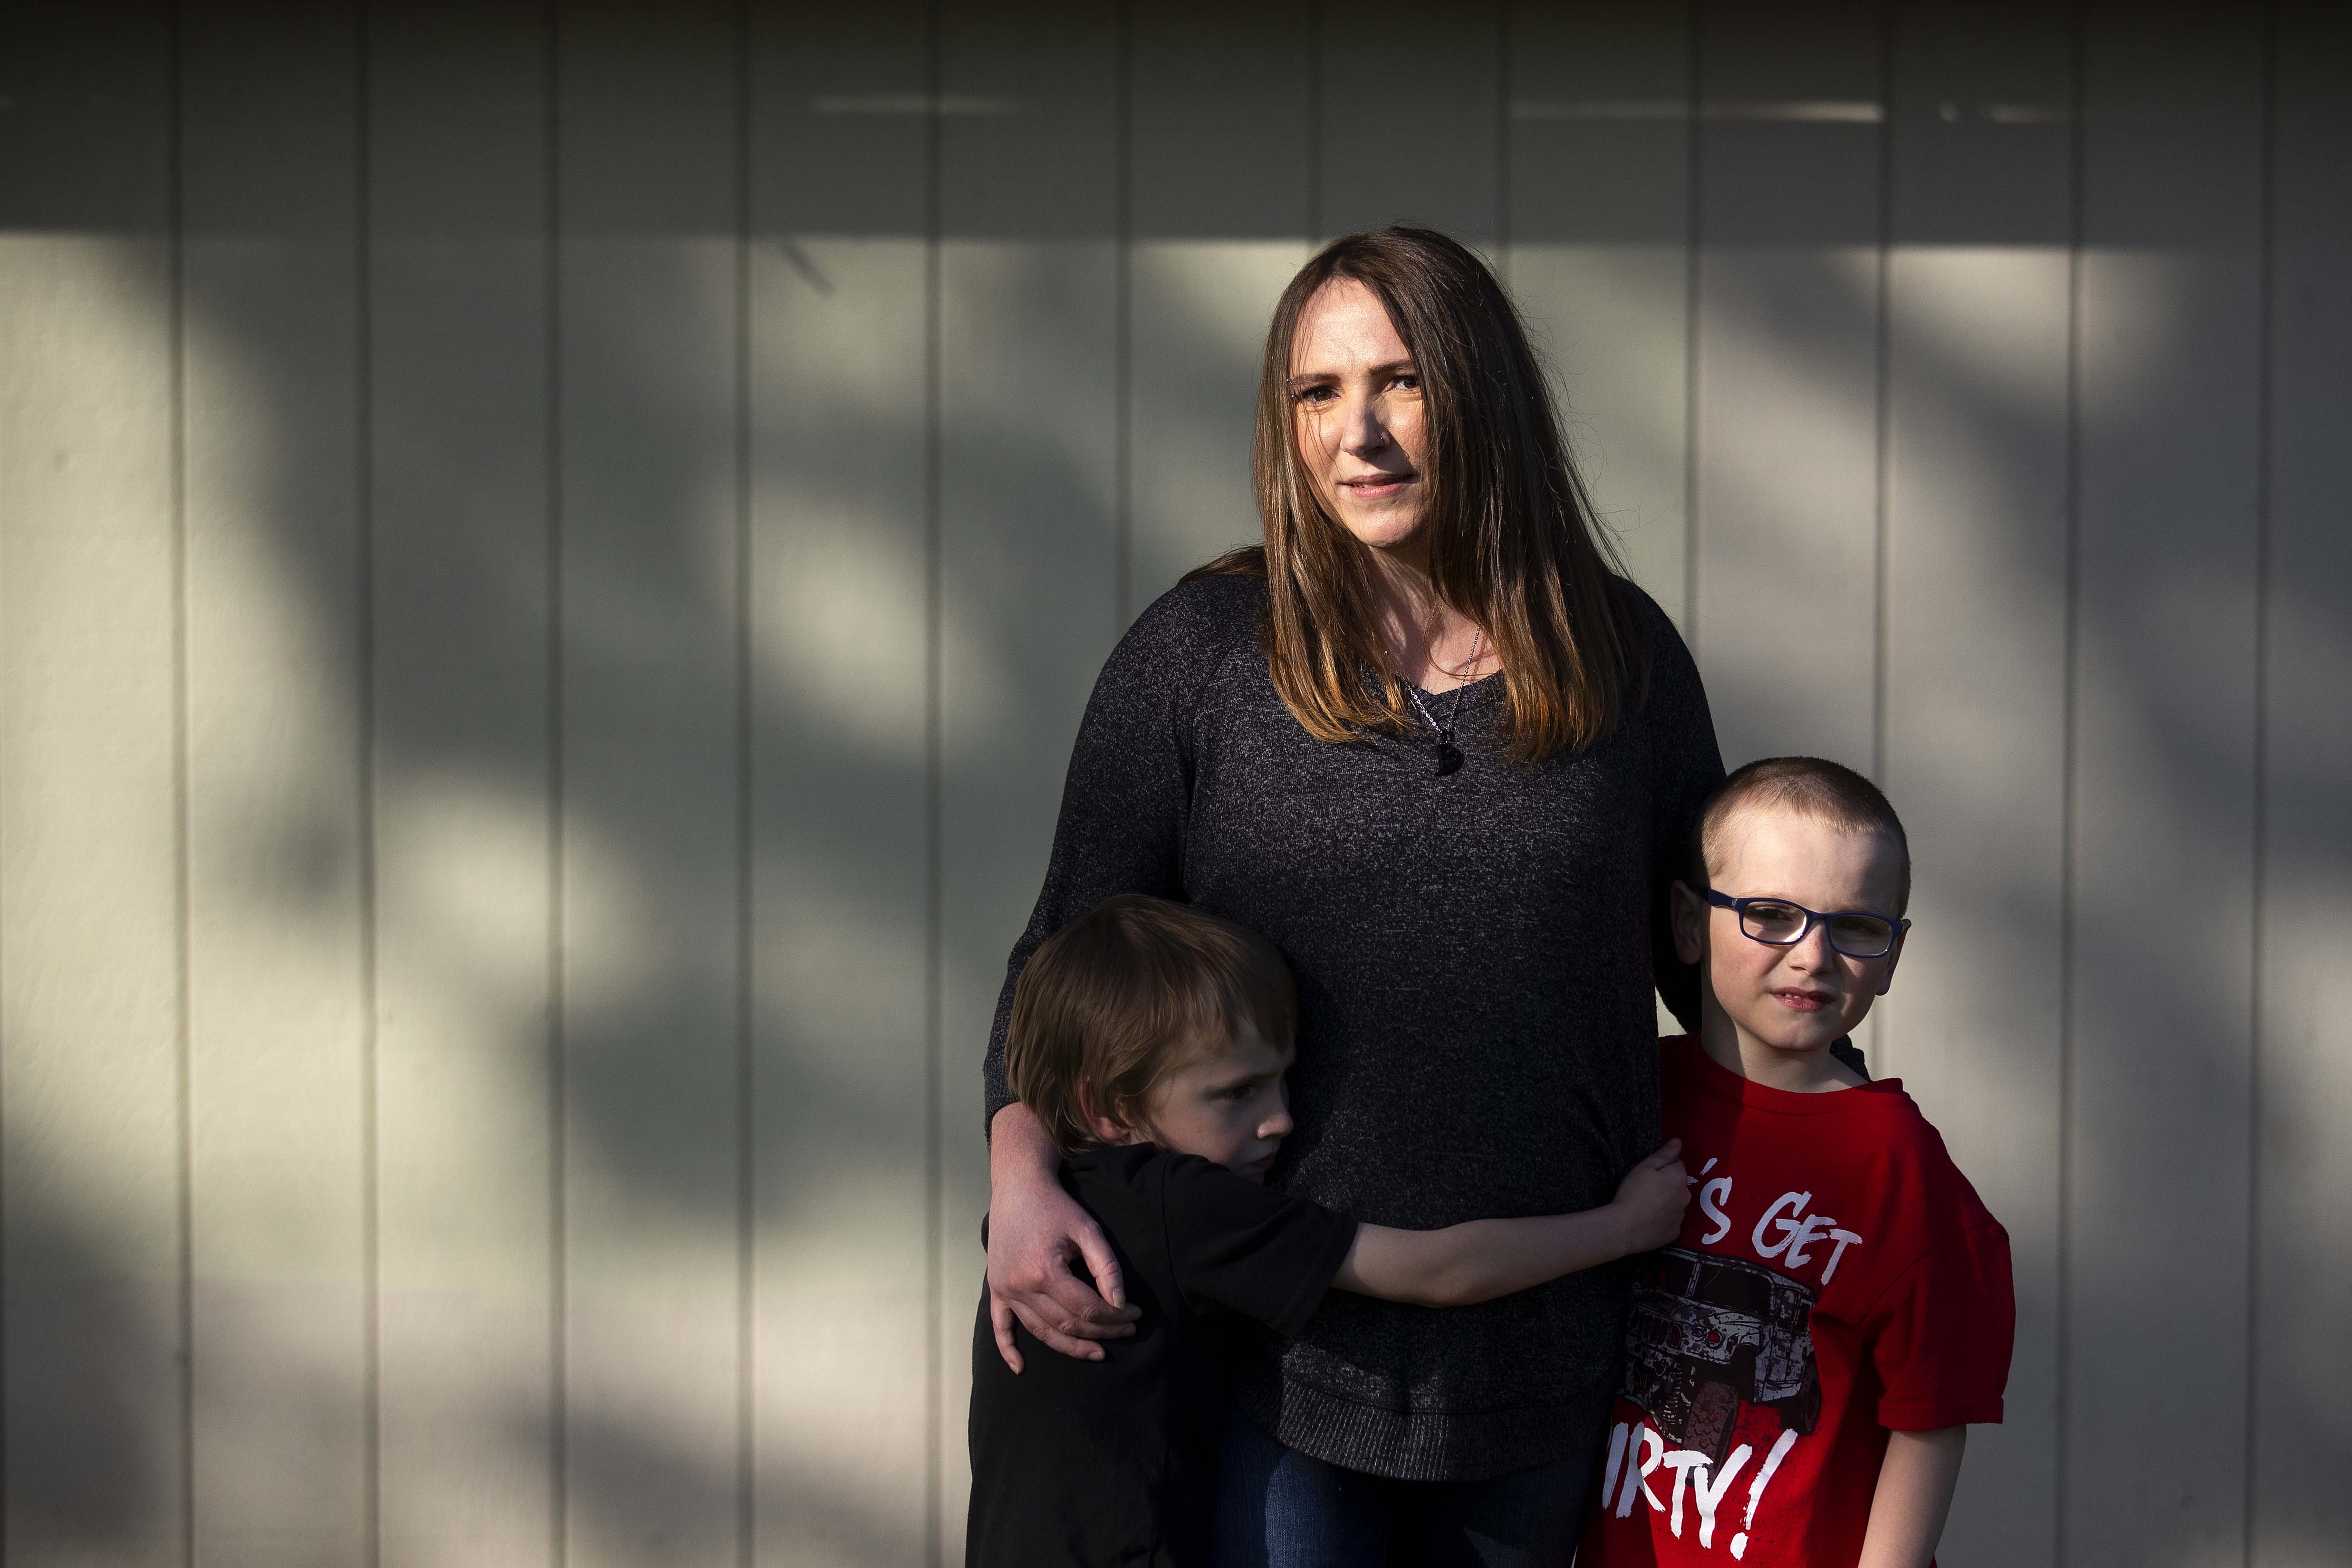 Amanda Schroeder, 31, stands with her two sons Jayden, 6, left, and Jeremiah, 8, on Tuesday, April 25, 2023, at Erickson Park in Port Angeles. KUOW Photo/Megan Farmer